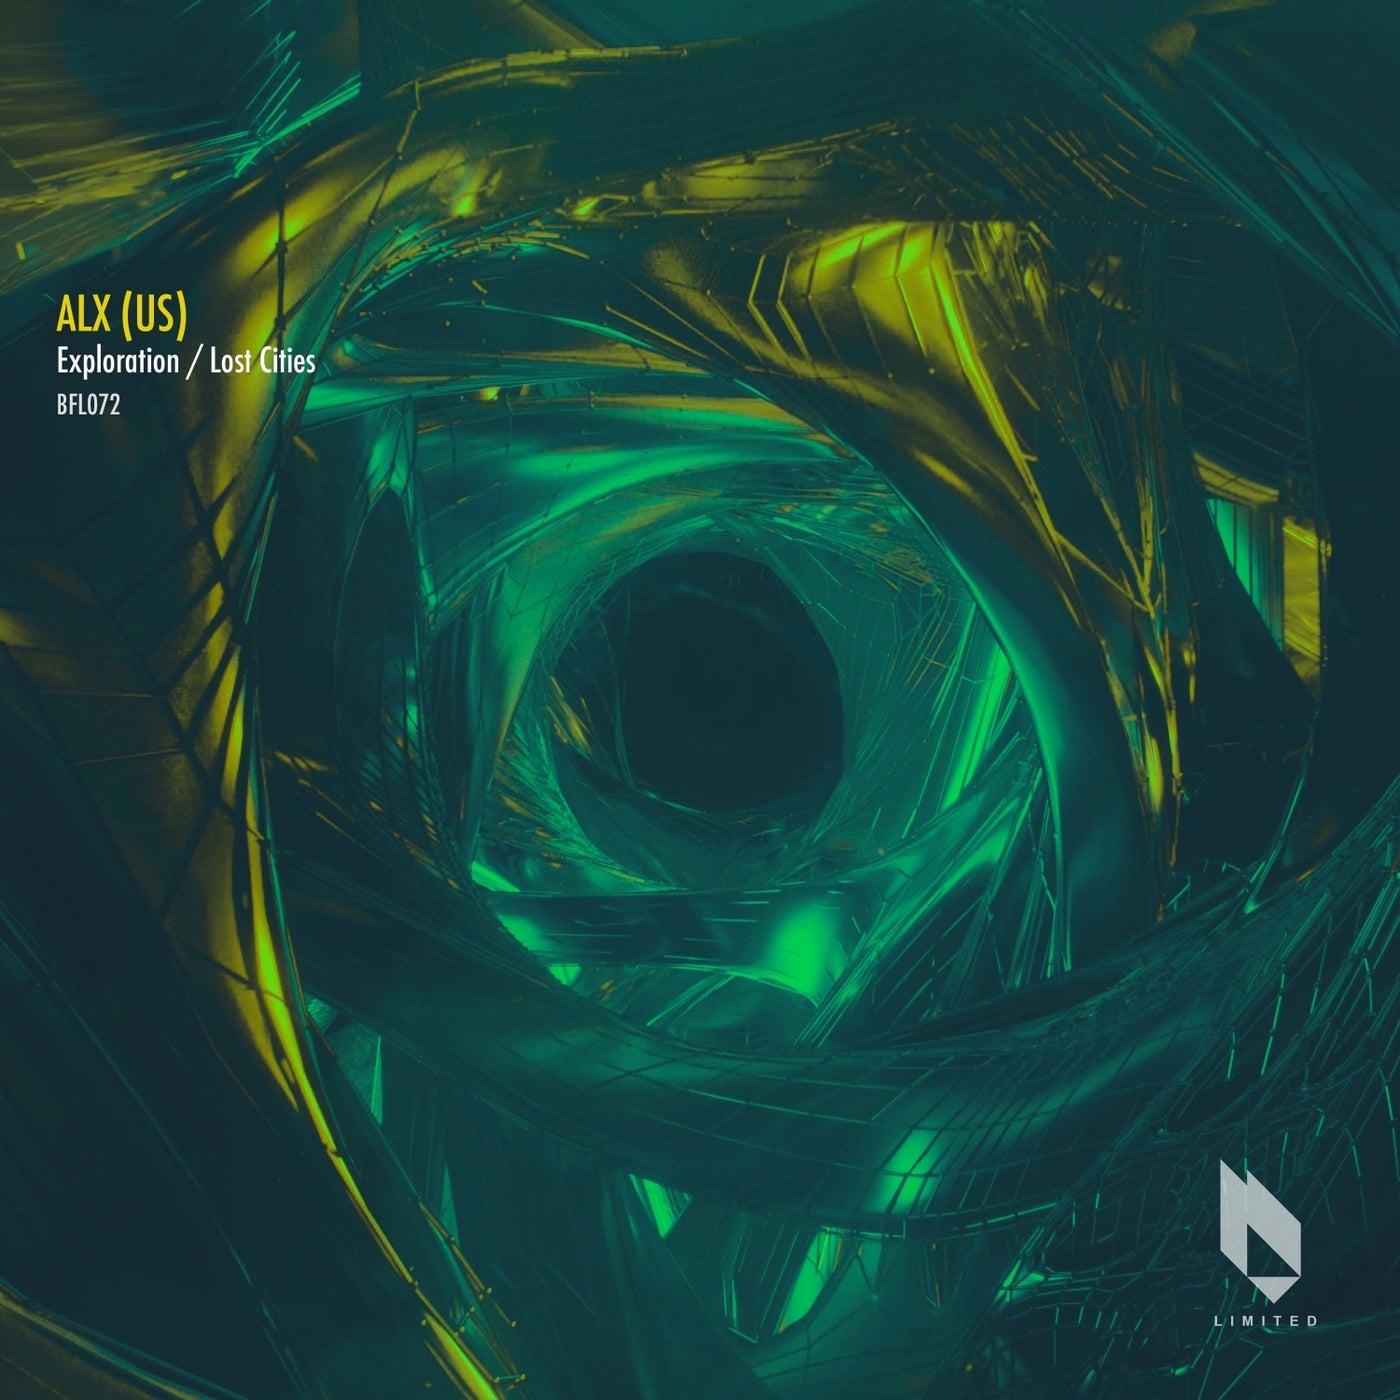 ALX (US) – Exploration / Lost Cities [BFL072]